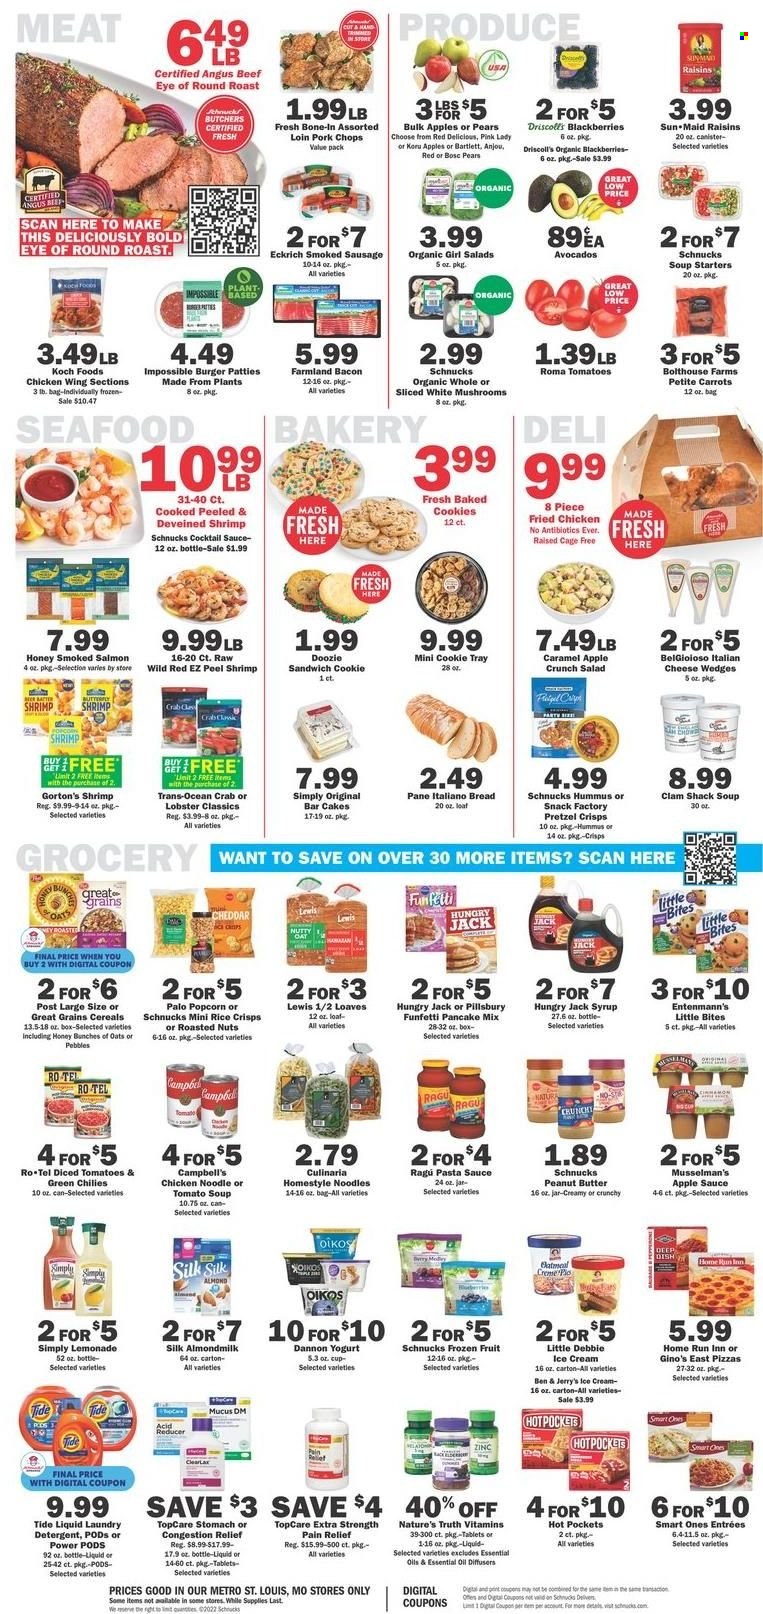 thumbnail - Schnucks Flyer - 11/30/2022 - 12/06/2022 - Sales products - mushrooms, bread, cake, Entenmann's, carrots, tomatoes, salad, avocado, blackberries, Red Delicious apples, pears, Pink Lady, clams, lobster, salmon, smoked salmon, seafood, crab, shrimps, Gorton's, Campbell's, tomato soup, hot pocket, pizza, pasta sauce, sandwich, soup, hamburger, sauce, fried chicken, pancakes, Pillsbury, noodles, ragú pasta, bacon, sausage, smoked sausage, hummus, cheddar, cheese, yoghurt, Oikos, Dannon, almond milk, cage free eggs, ice cream, Ben & Jerry's, cookies, Little Bites, pretzel crisps, rice crisps, oatmeal, tomatoes & green chilies, diced tomatoes, cereals, rice, cocktail sauce, ragu, apple sauce, peanut butter, syrup, raisins, dried fruit, lemonade, beef meat, eye of round, round roast, burger patties, pork chops, pork meat, detergent, Tide, Omo, laundry detergent, Nature's Truth, pain relief, zinc. Page 4.